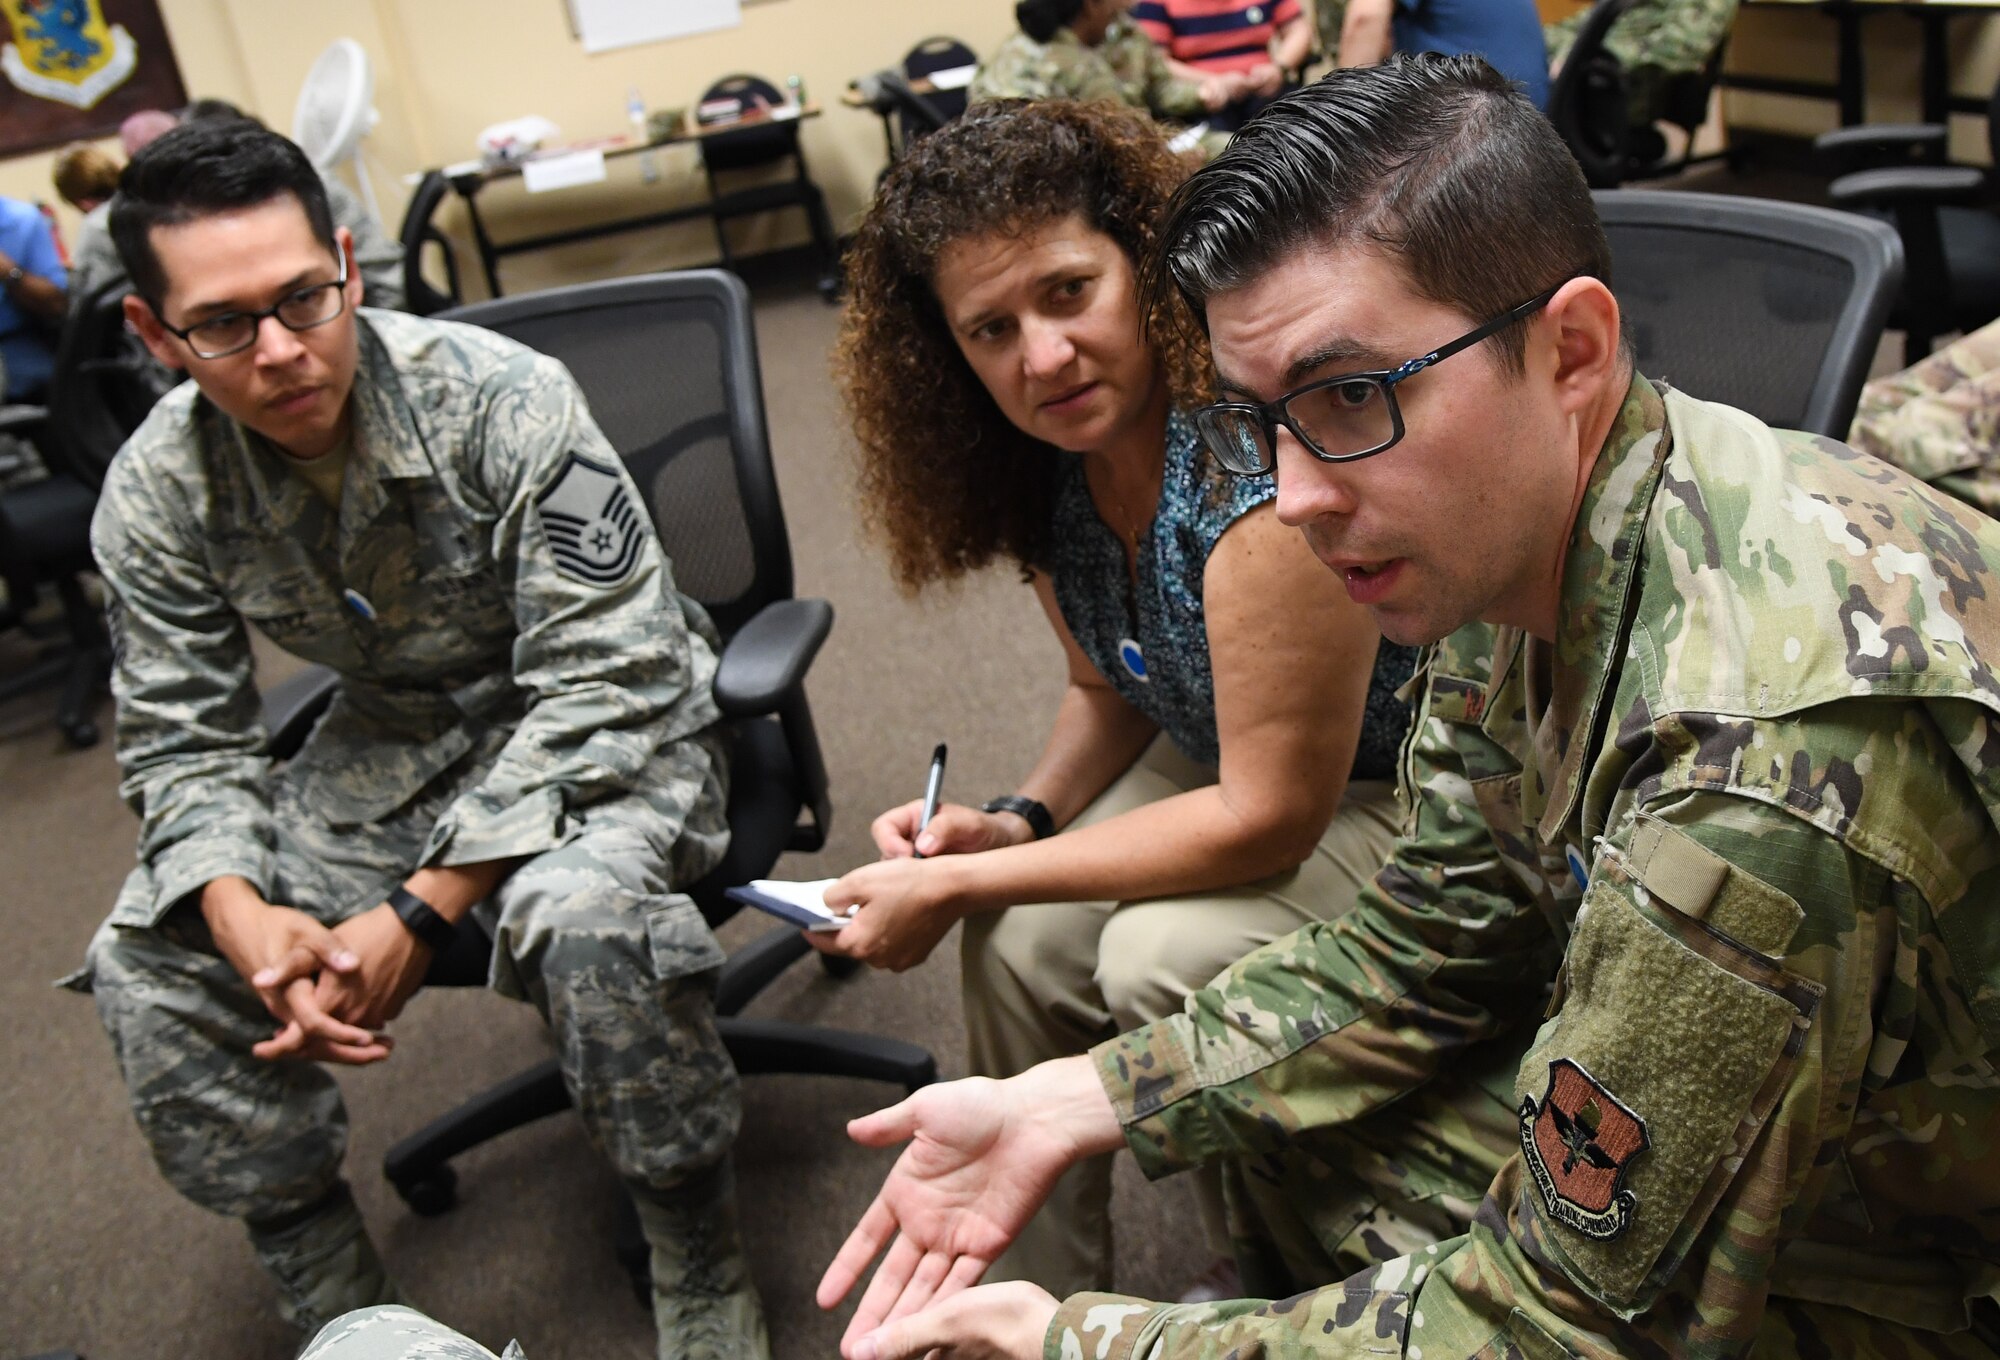 U.S. Air Force Tech. Sgt. Zach McDaniel, 81st Medical Operations Squadron respiratory therapy NCO in charge, participates in a discussion with fellow students during a "Star Power" exercise during the Leadership Enhancement and Development Seminar inside the Airman Leadership School building at Keesler Air Force Base, Mississippi, Nov. 5, 2019. The three-day course, which is open to all supervisors, is meant to enhance effective communication, skillful interpersonal interaction and emotional intelligence in the military environment by using an active learning format that emphasizes discussion and minimizes lecture. (U.S. Air Force photo by Kemberly Groue)